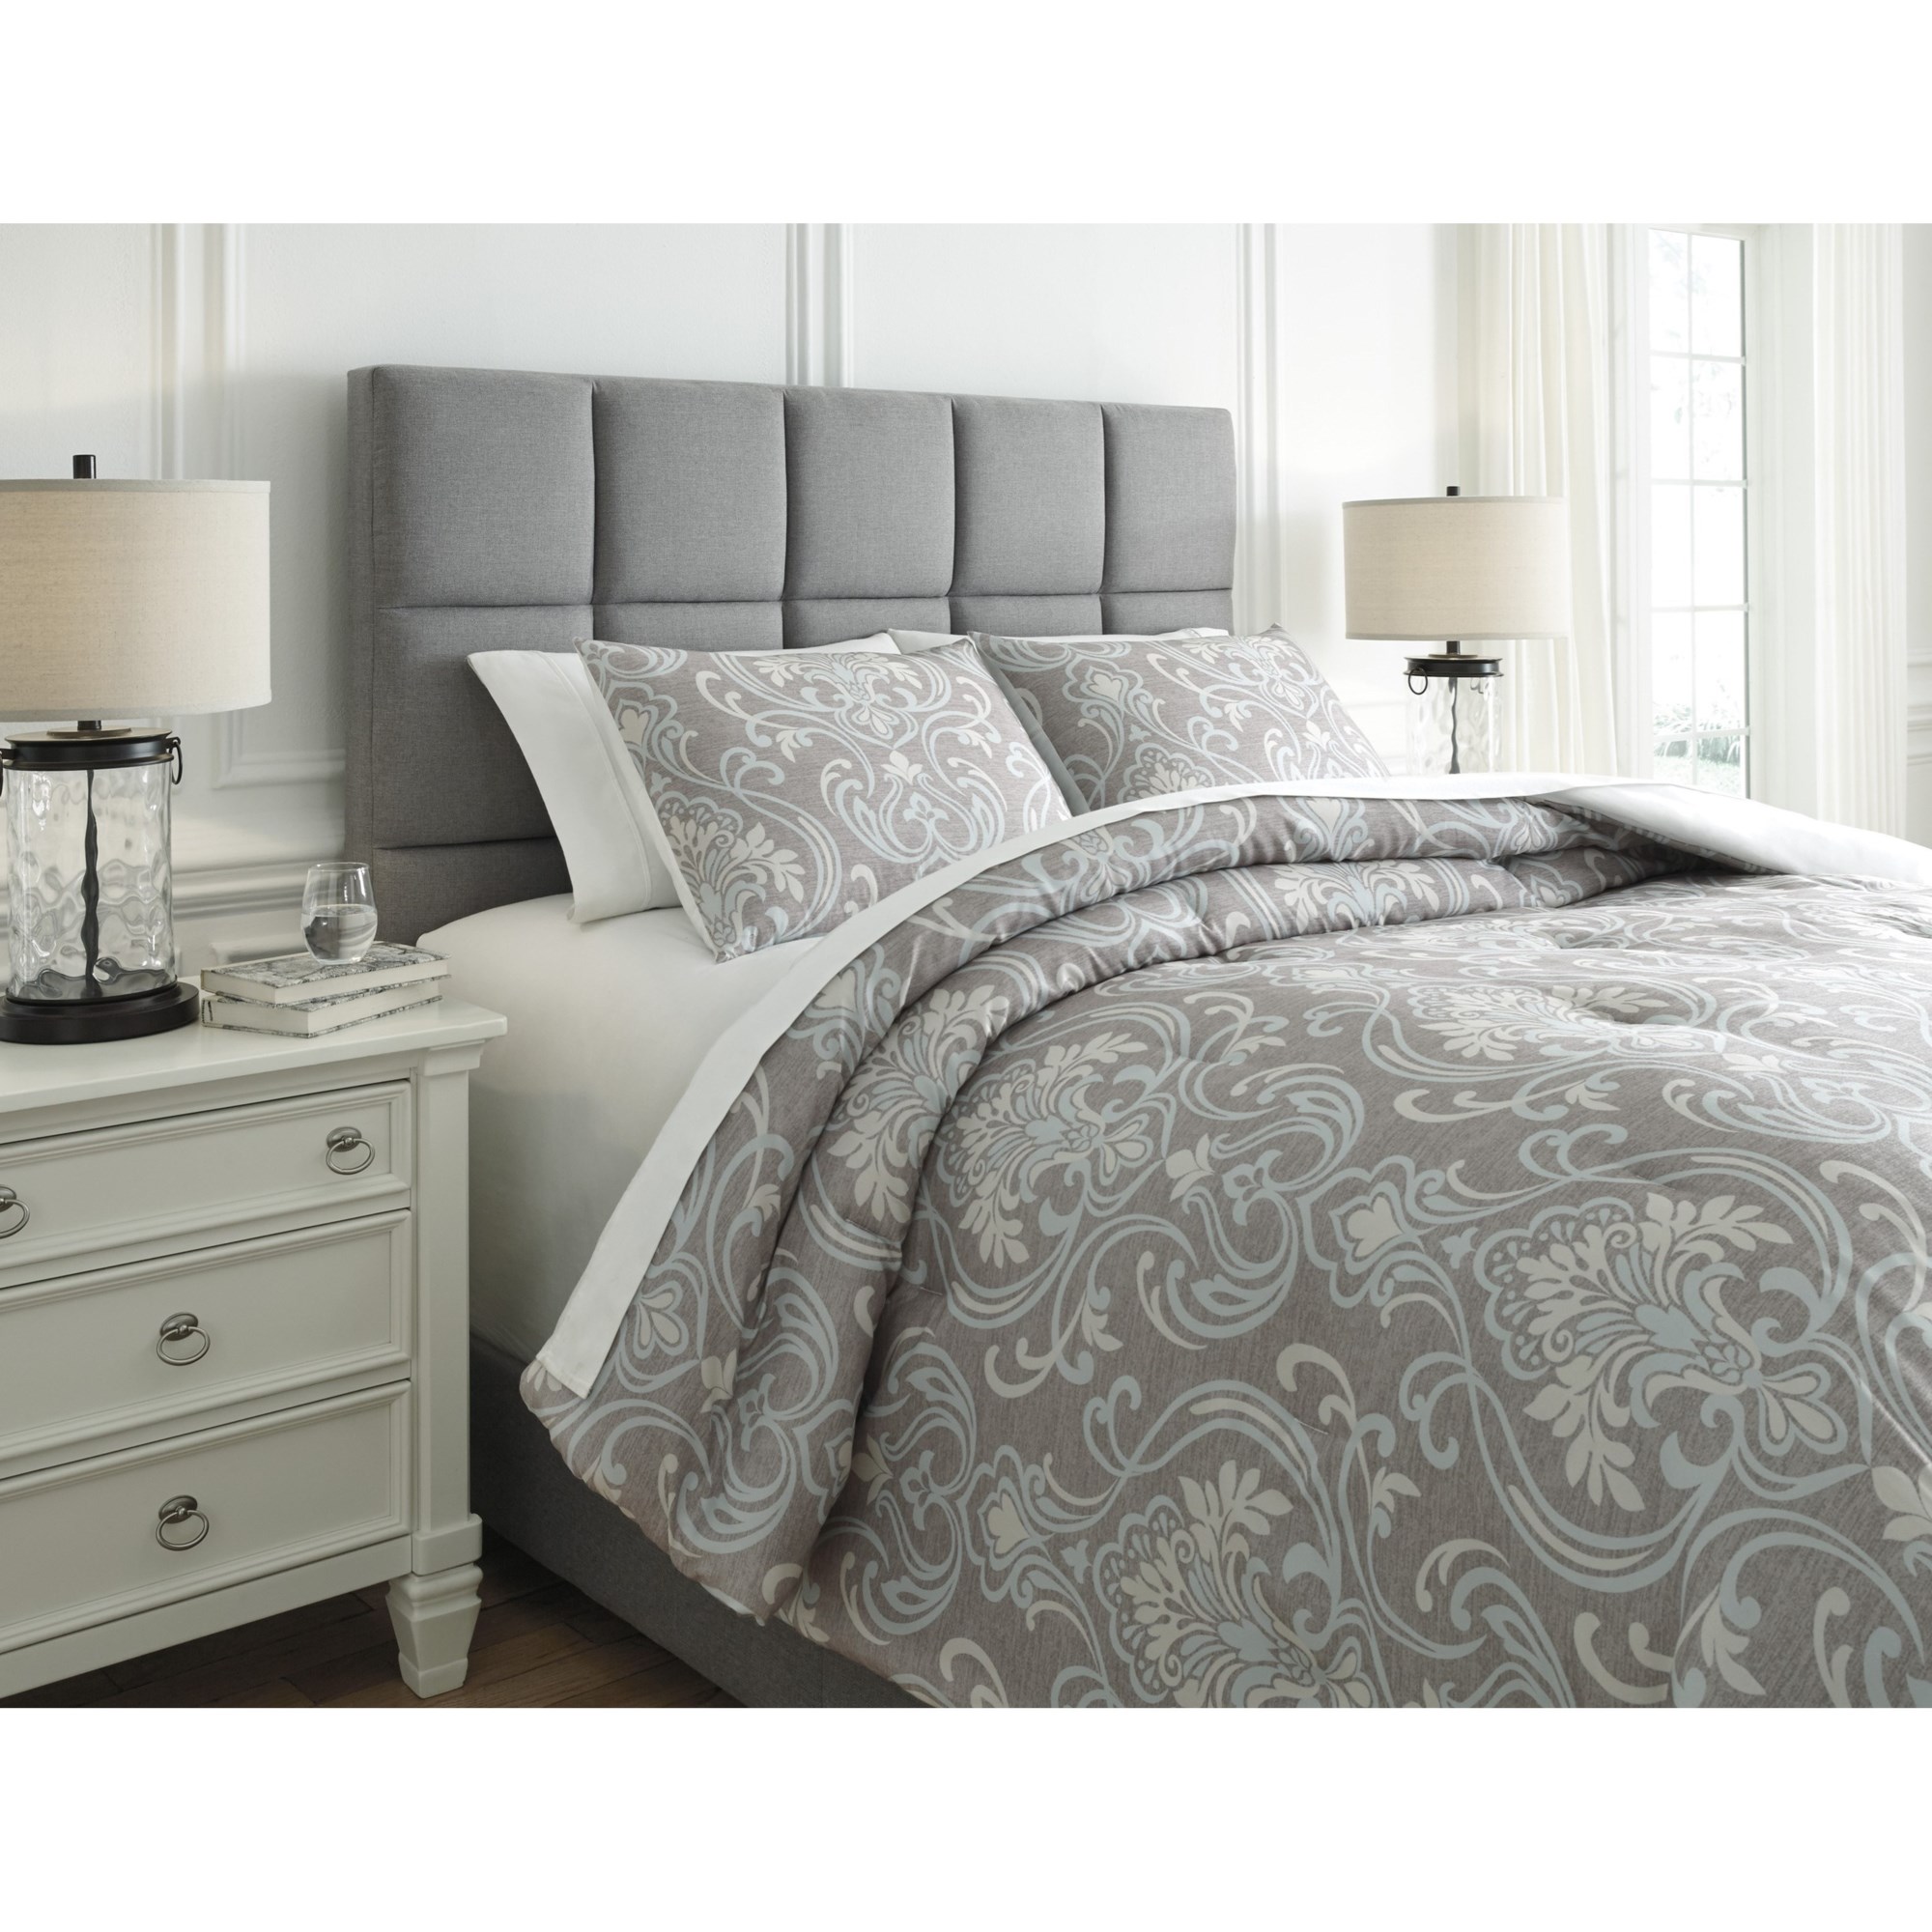 Signature Design by Ashley Bedding Sets Q780003Q Queen Noel Gray/Tan  Comforter Set, Furniture and ApplianceMart